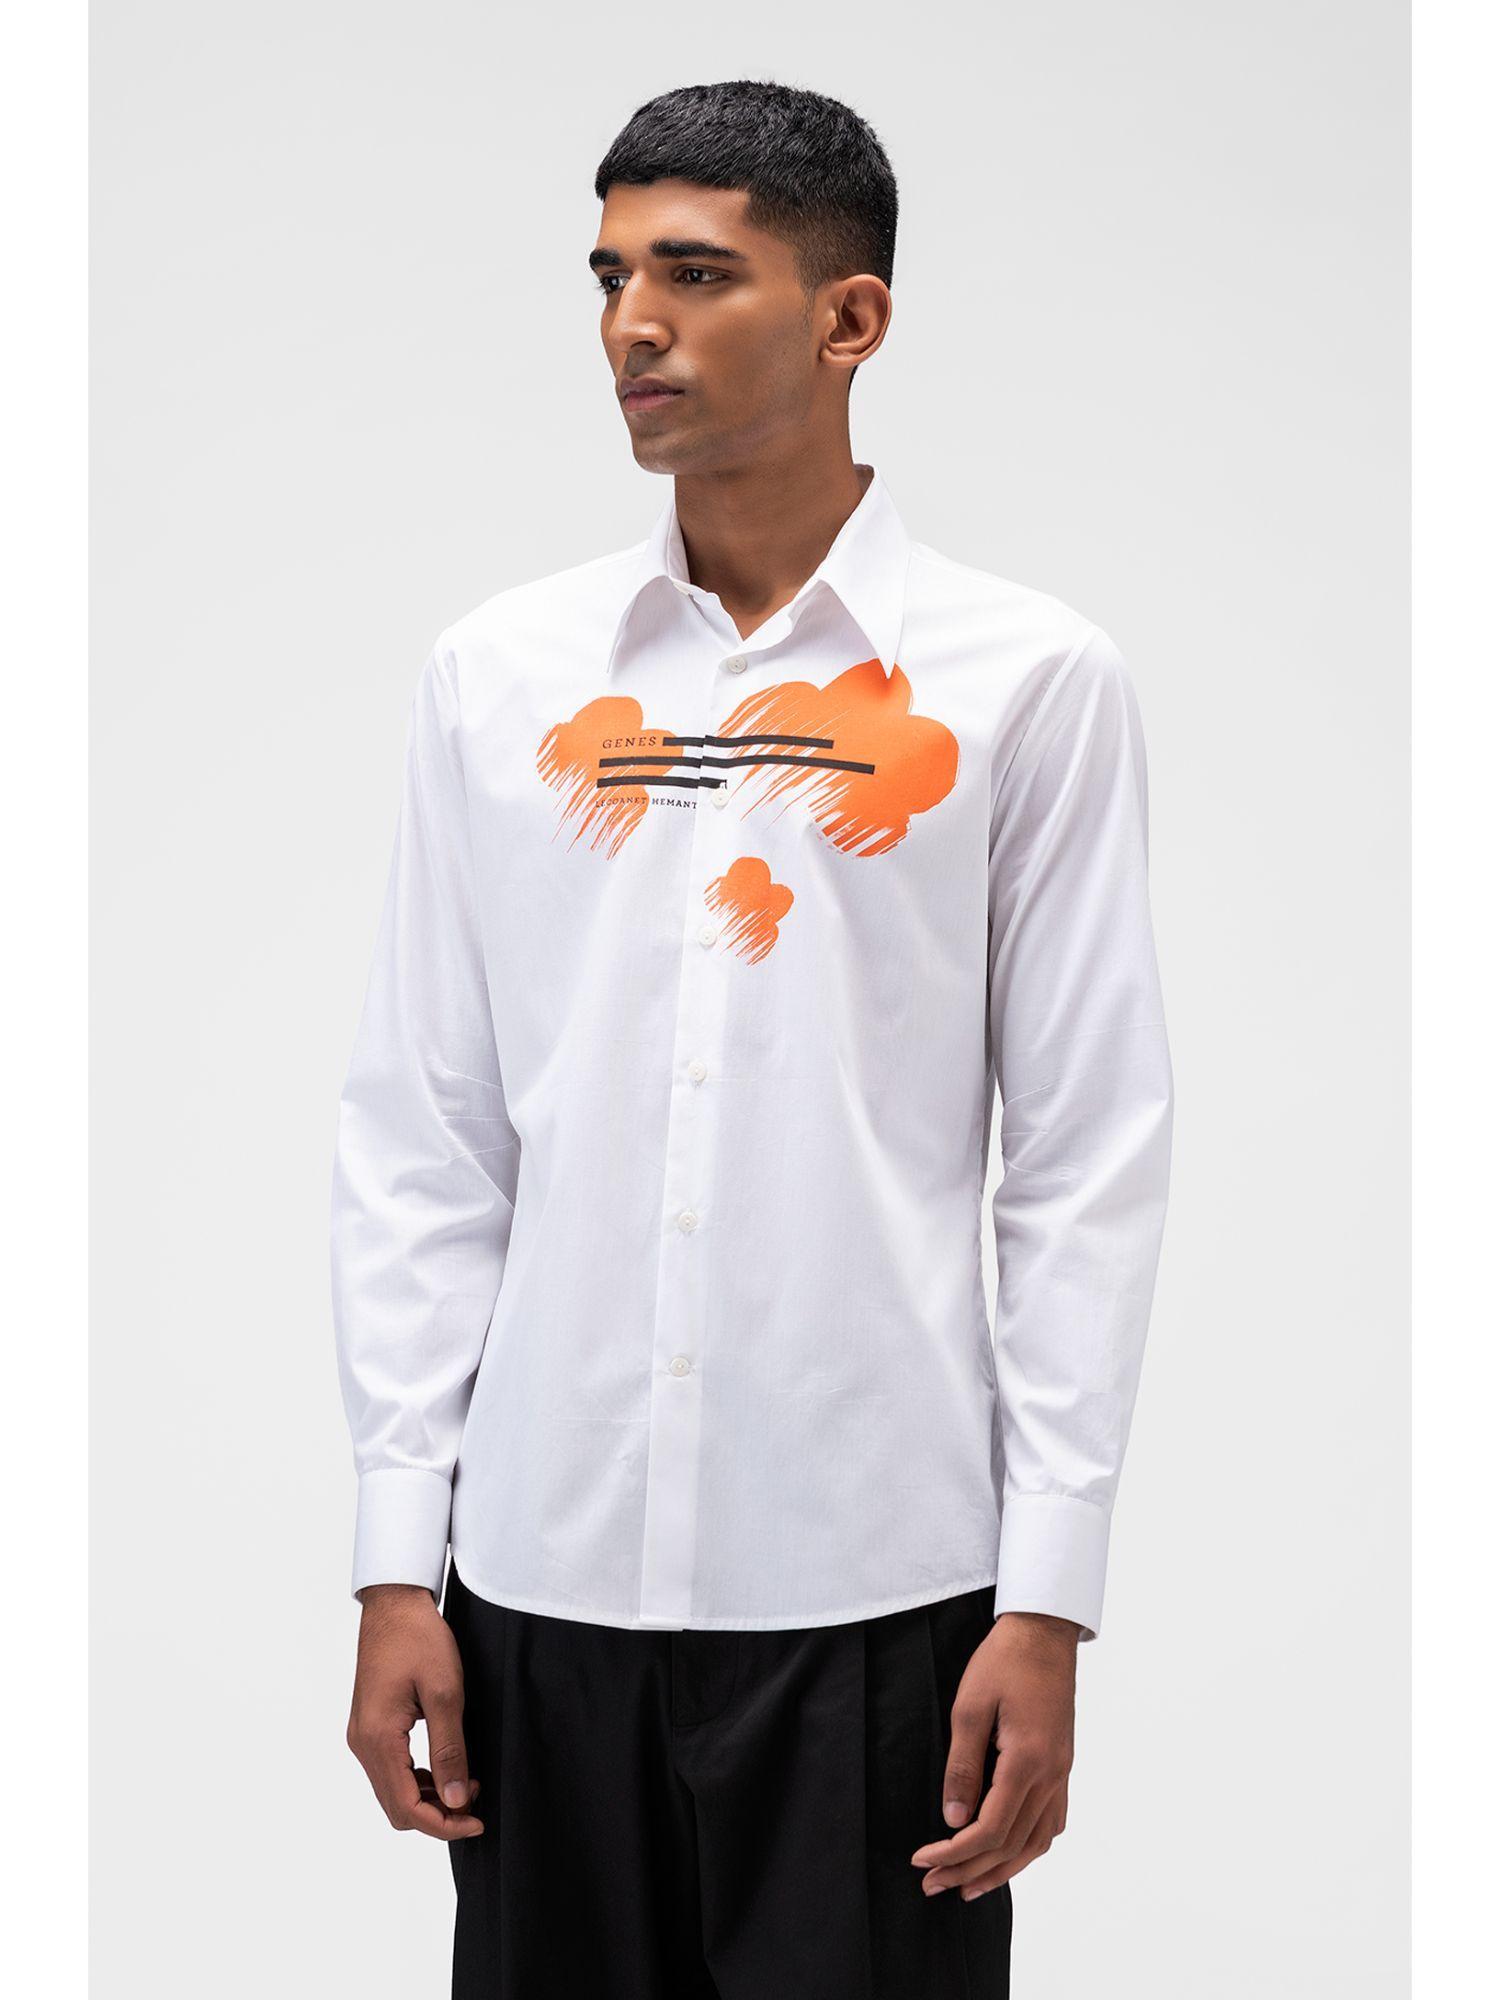 genes shirt with abstract orange floral print